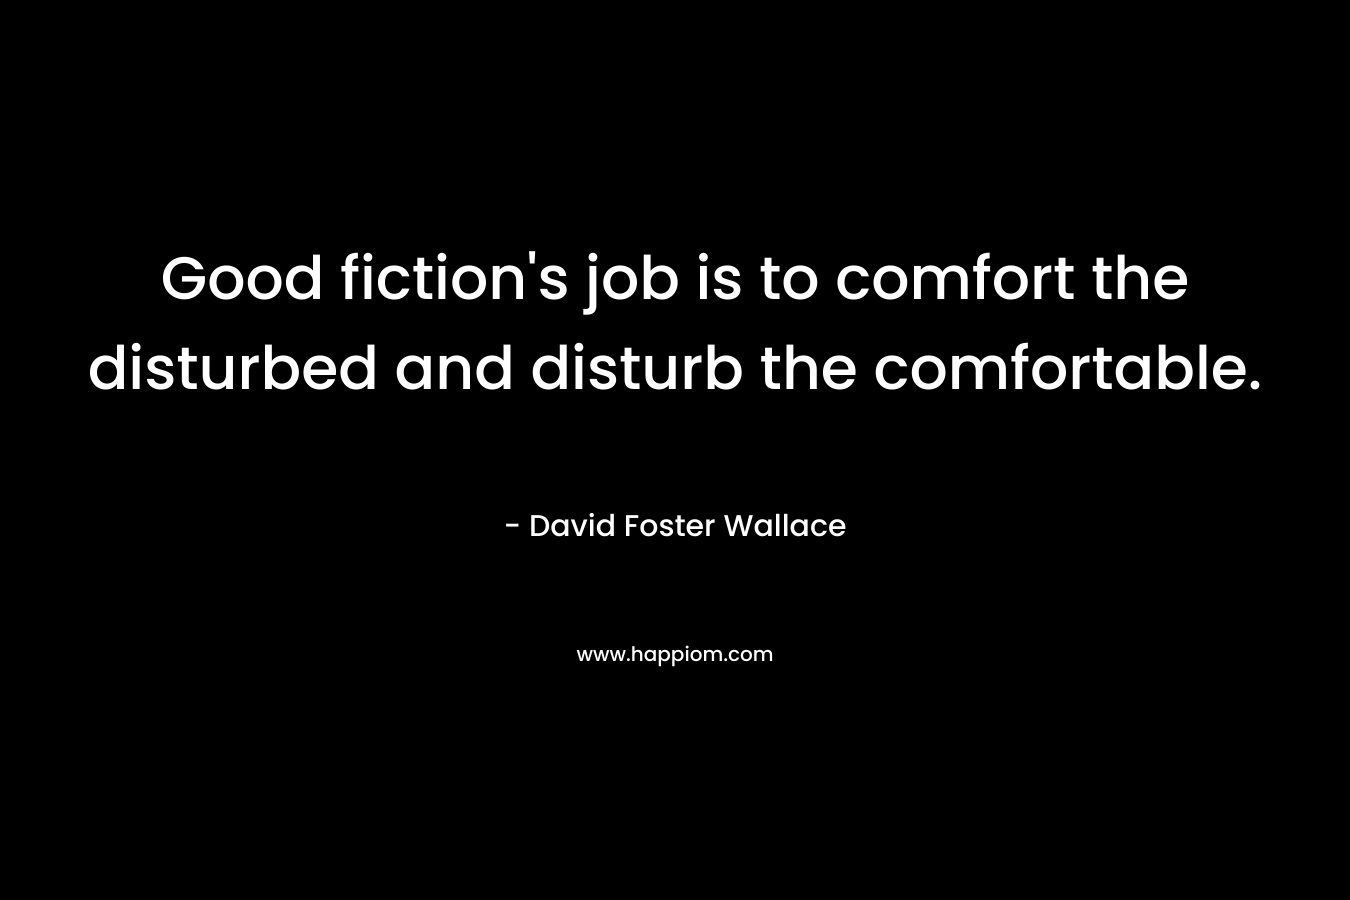 Good fiction’s job is to comfort the disturbed and disturb the comfortable. – David Foster Wallace